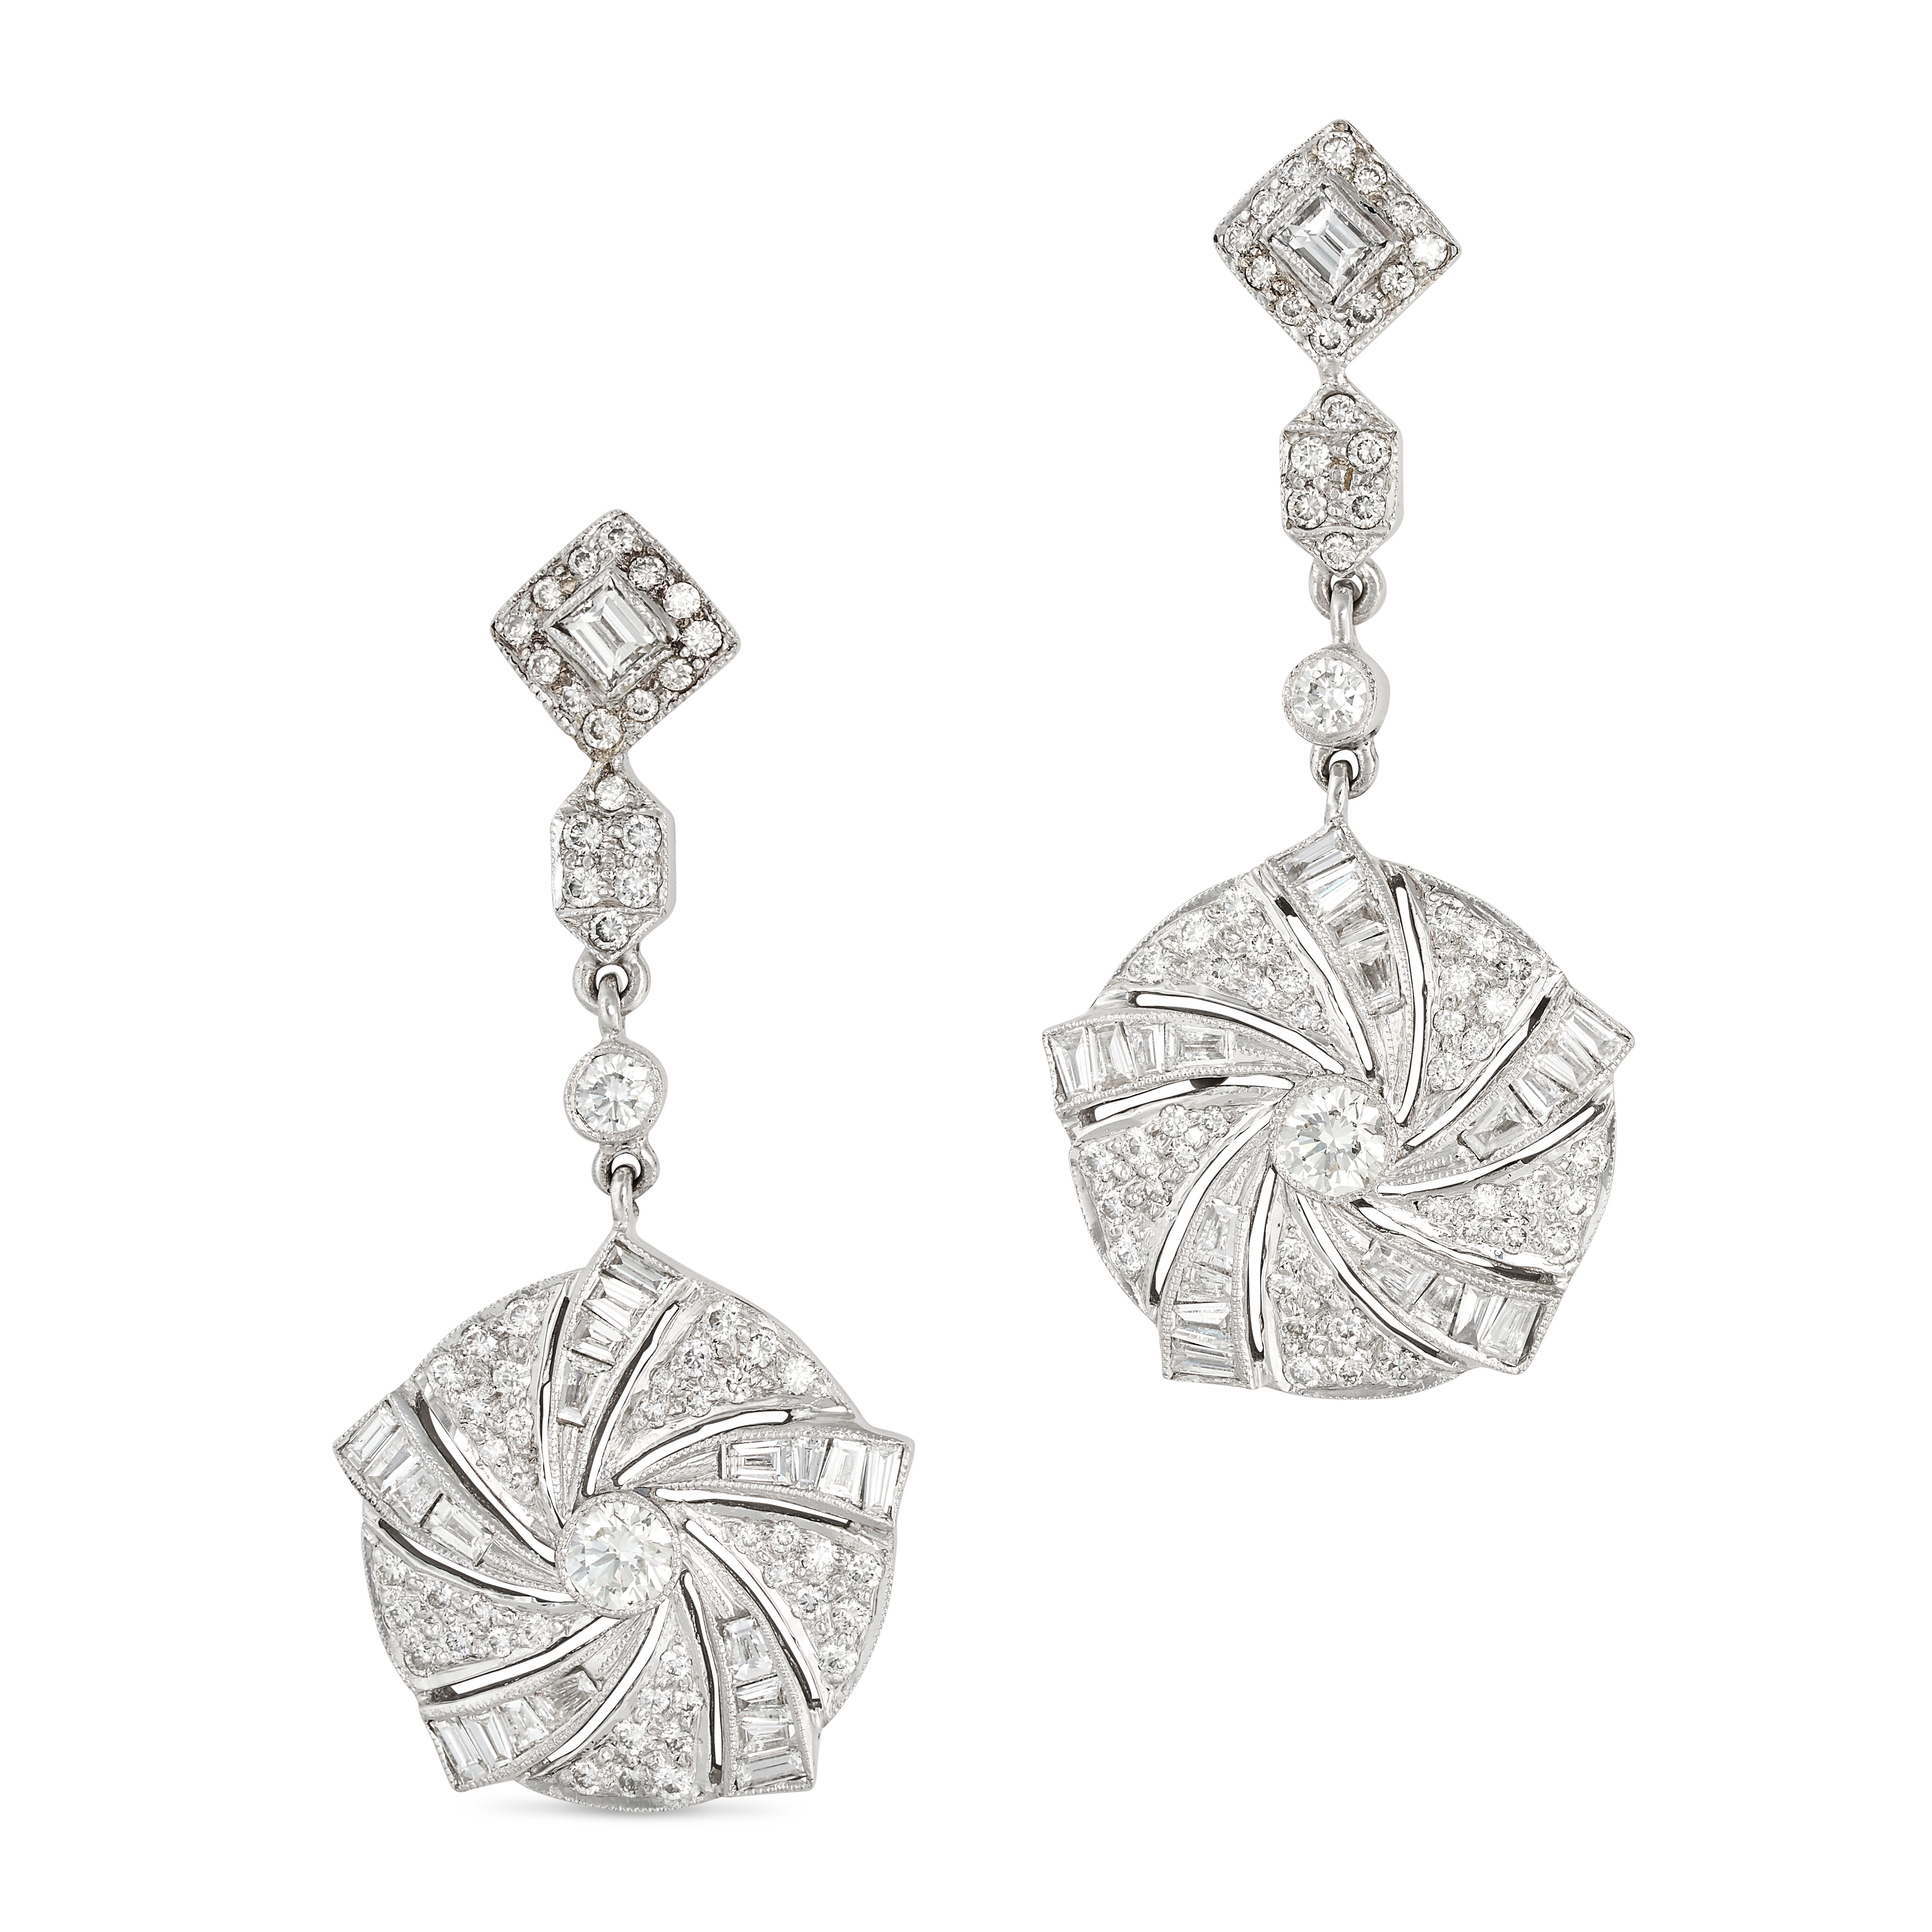 A PAIR OF DIAMOND DROP EARRINGS in 18ct white gold, each comprising a baguette cut diamond in a b...